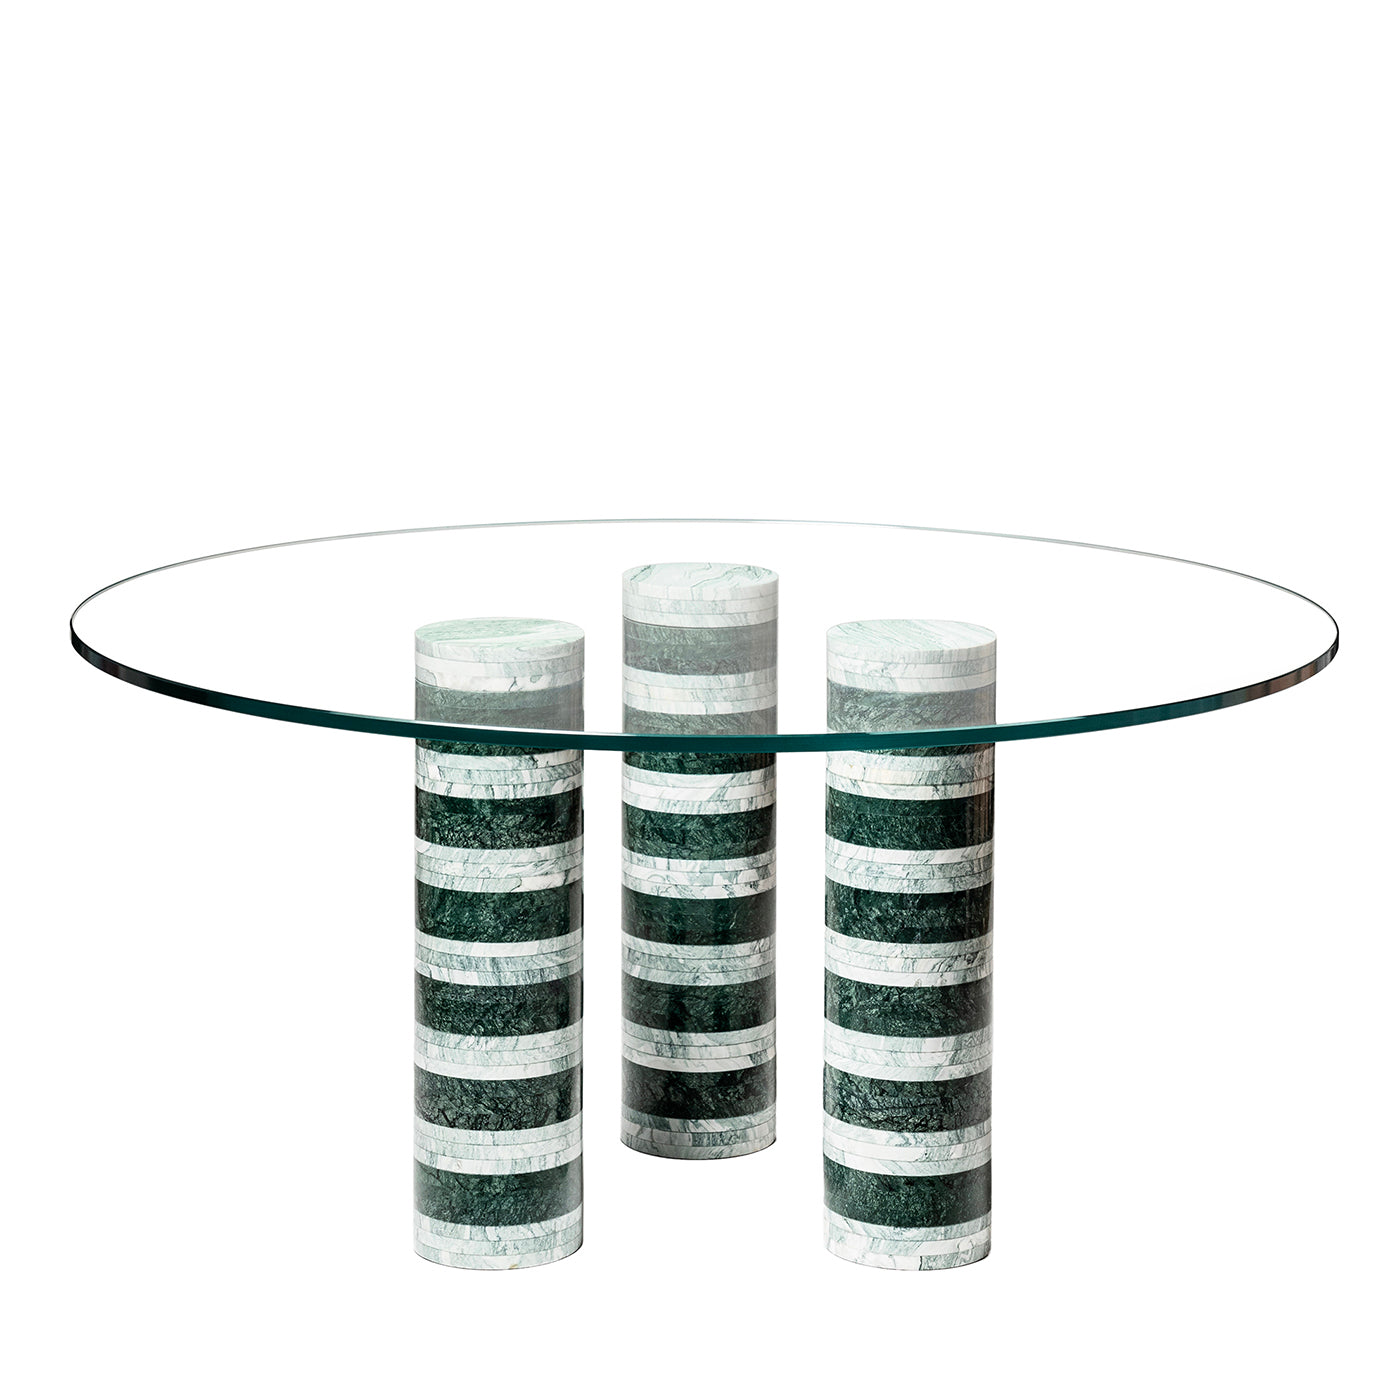 Architexture Living Table 03 by Patricia Urquiola - Main view